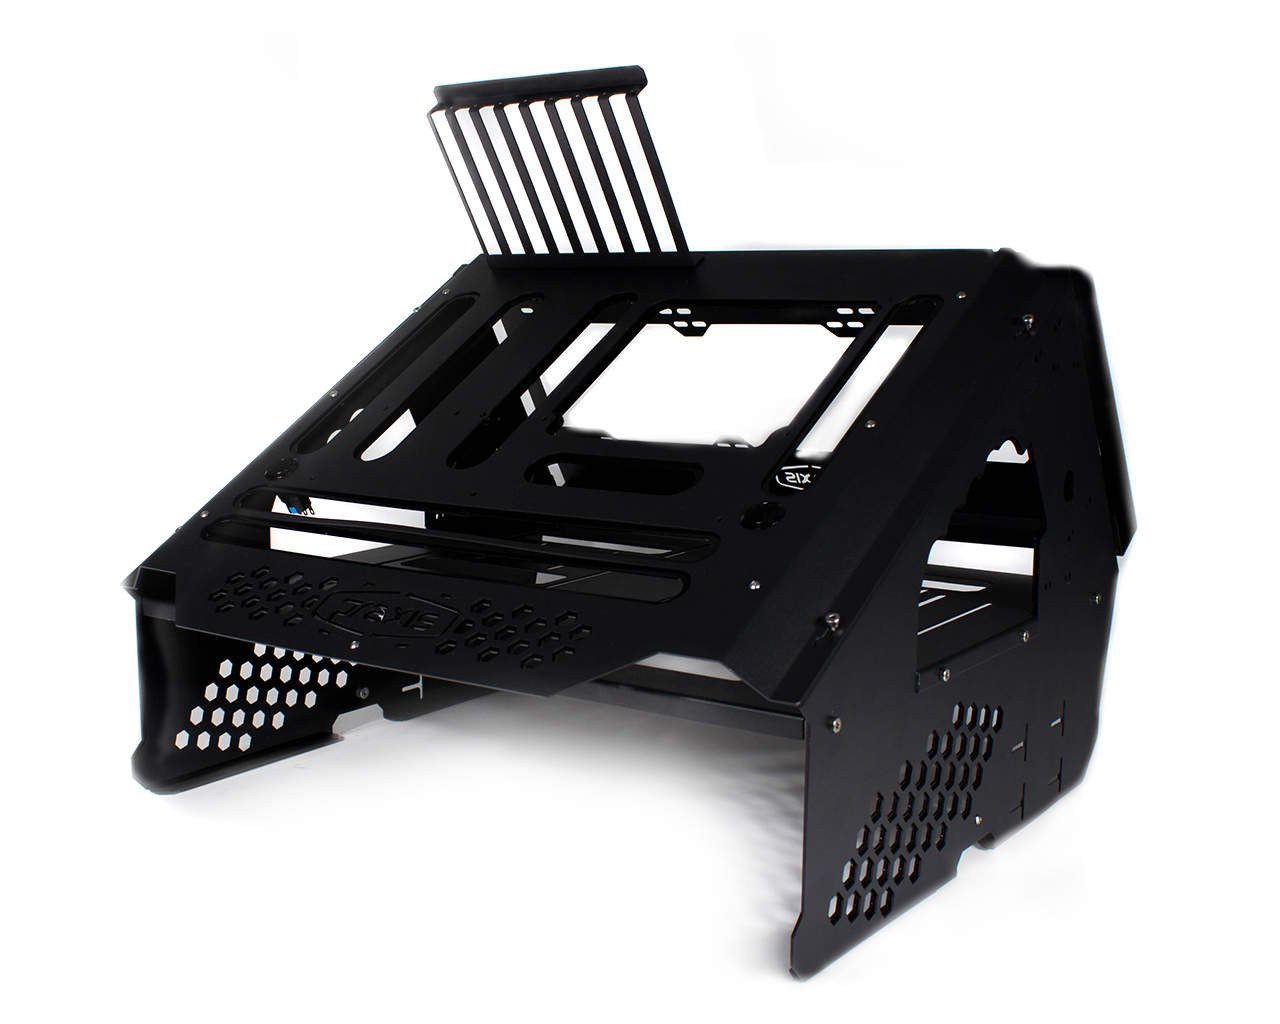 PrimoChill's Praxis Wetbench Powdercoated Steel Modular Open Air Computer Test Bench for Watercooling or Air Cooled Components - PrimoChill - KEEPING IT COOL Black w/Black Accents